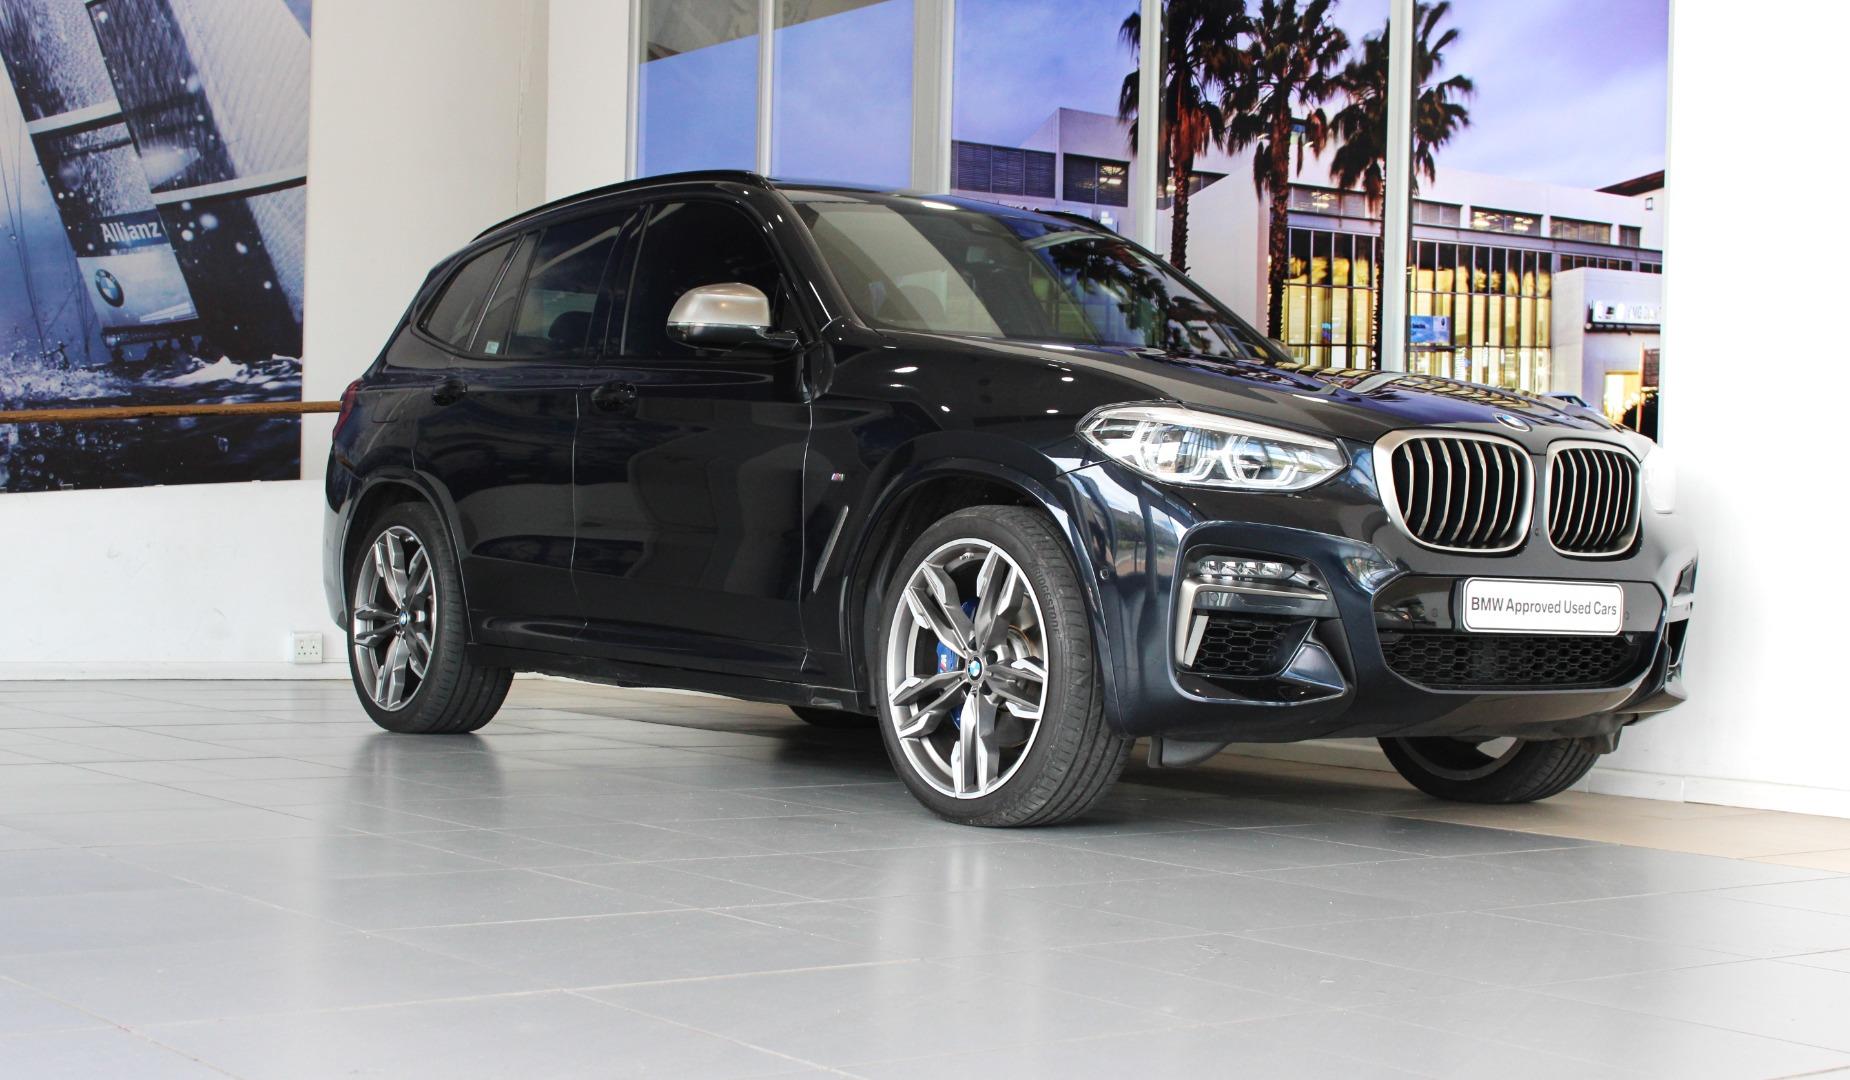 2021 BMW X3 M40D (G01)  for sale - SMG12|USED|115248